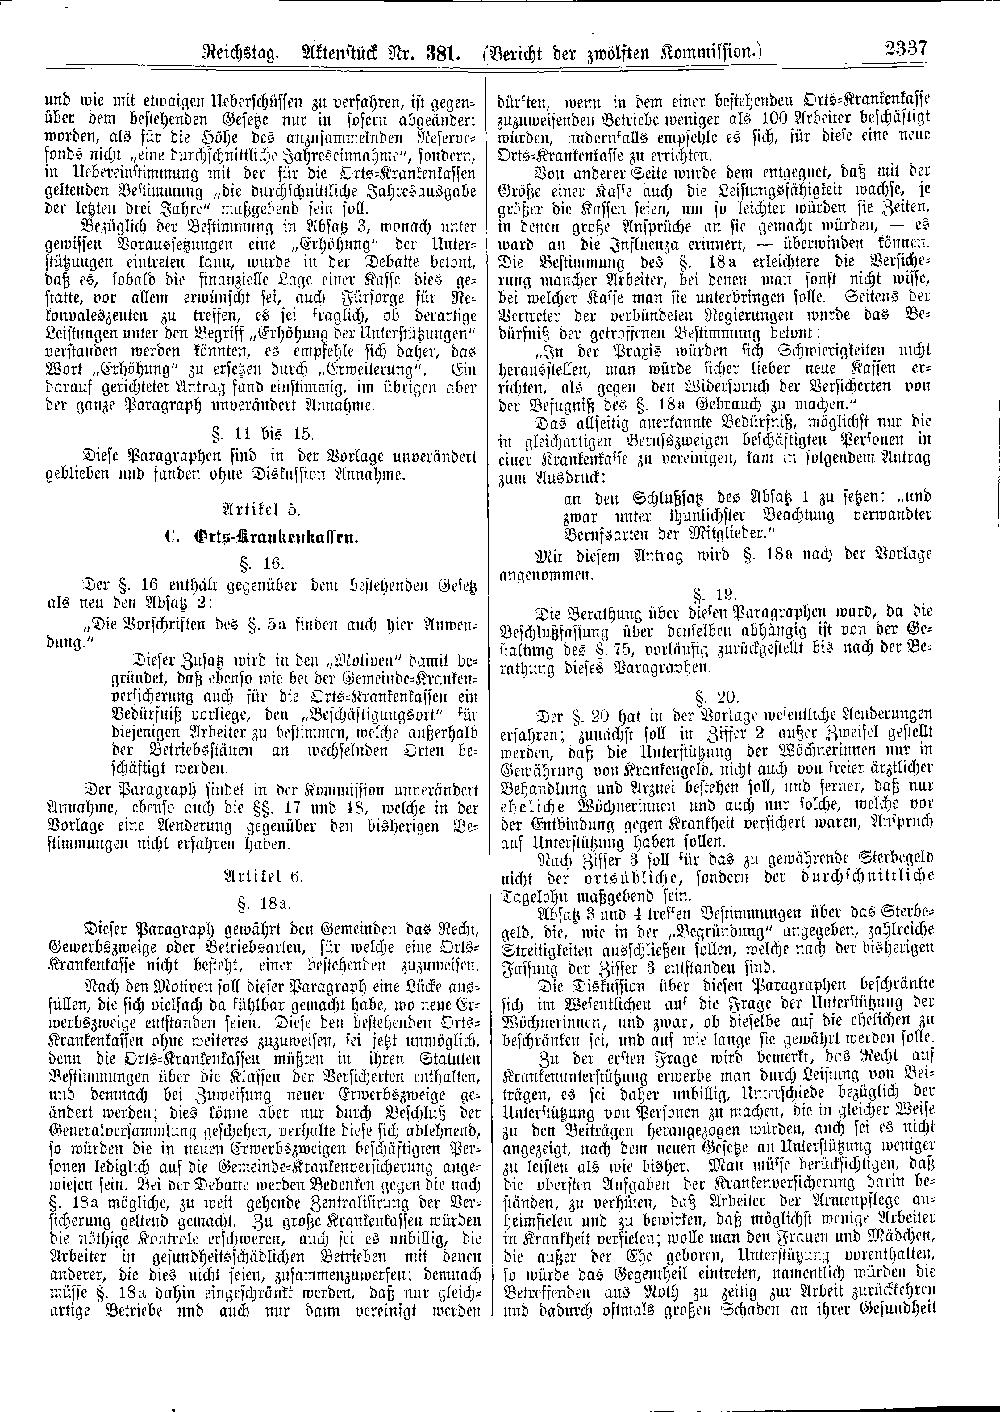 Scan of page 2337